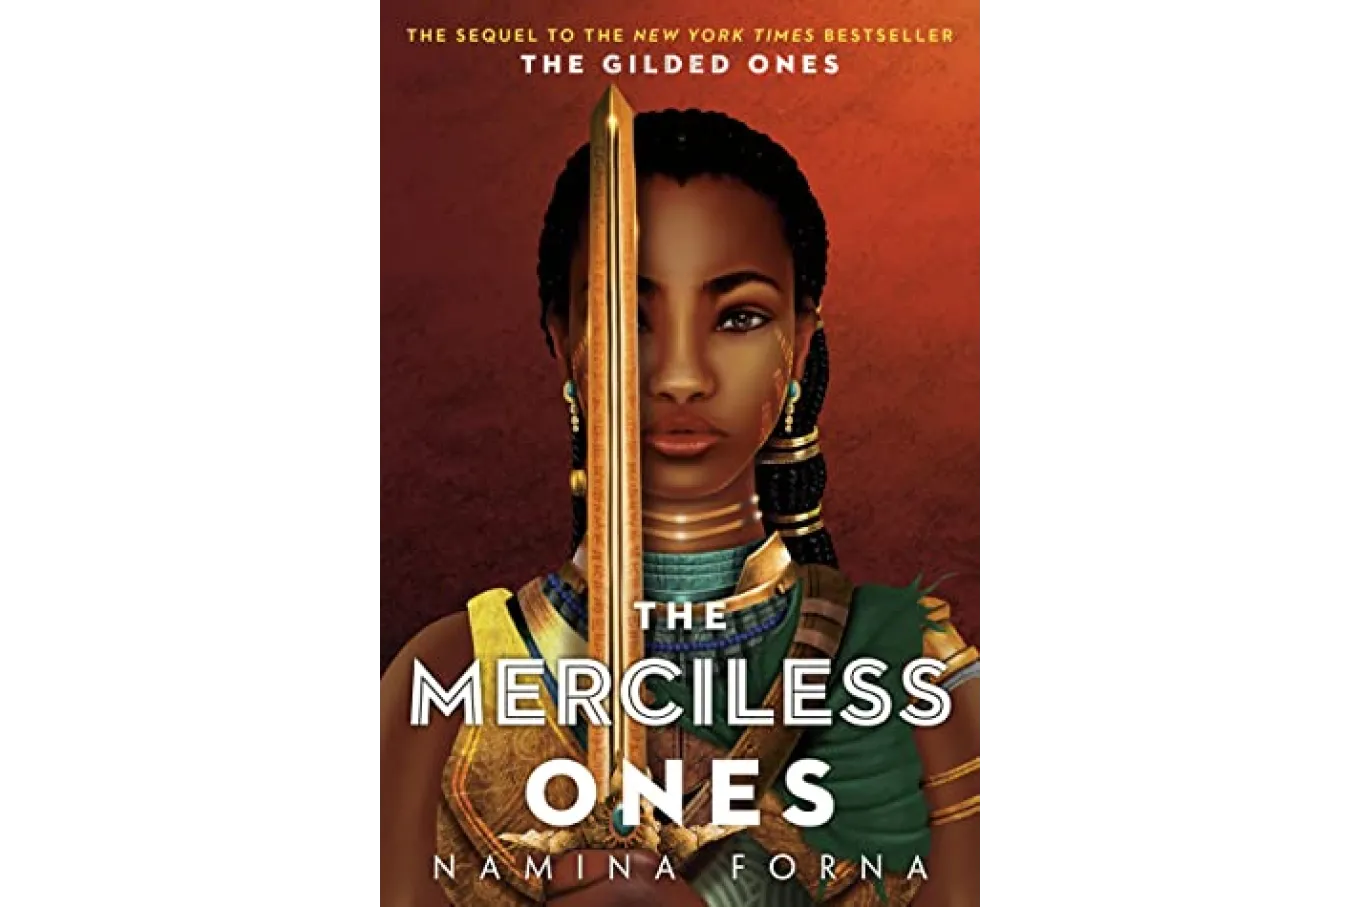 Cover of The Merciless Ones by Namina Forna